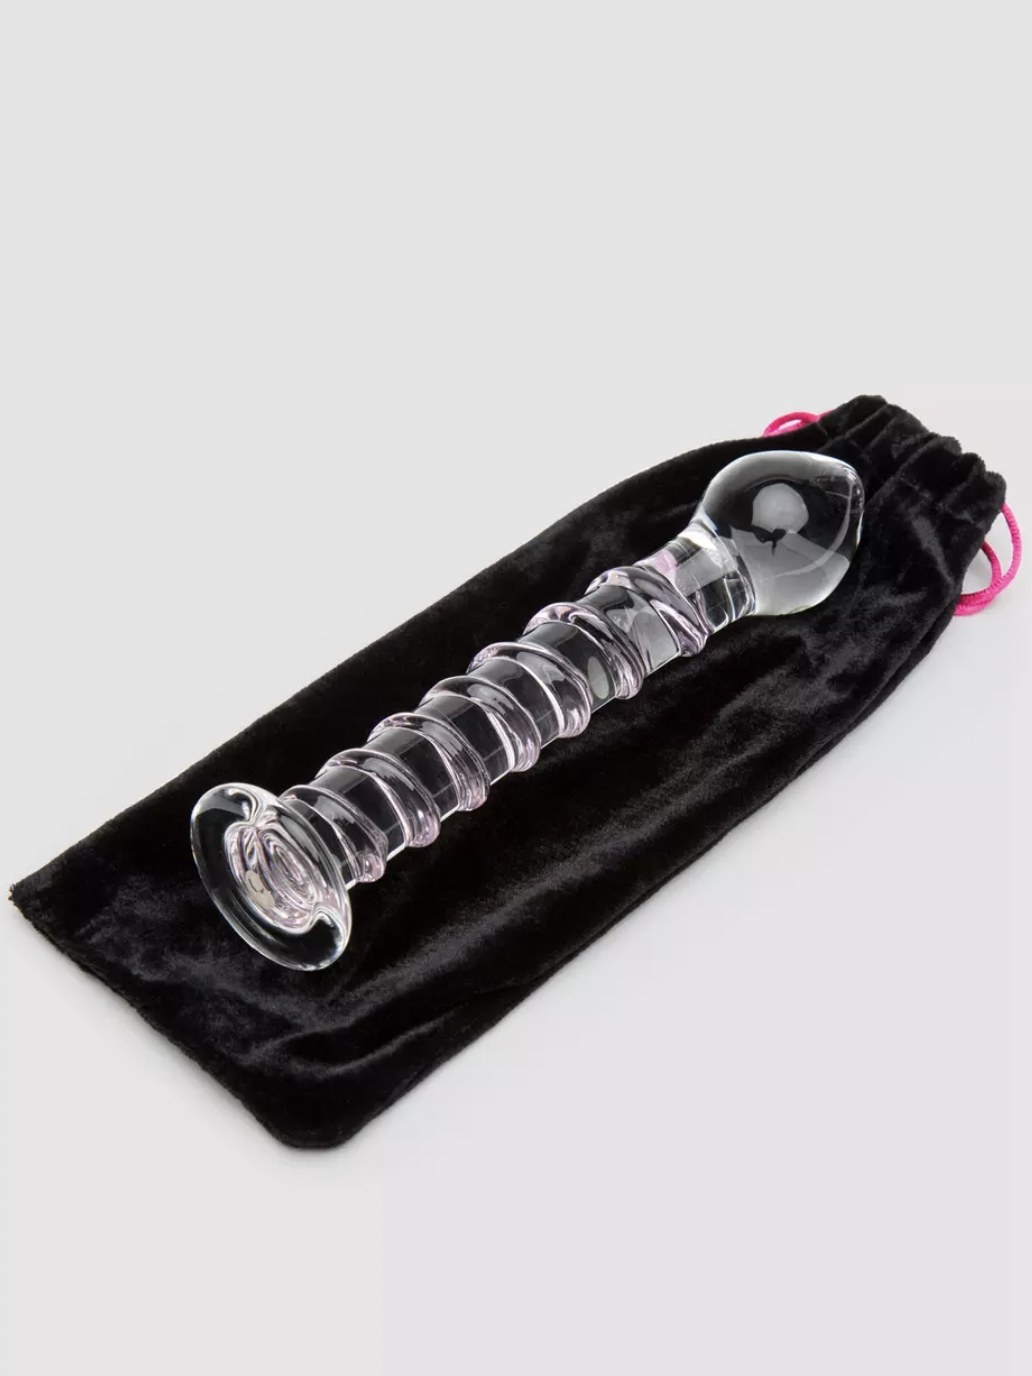 The glass dildo resting on black pouch